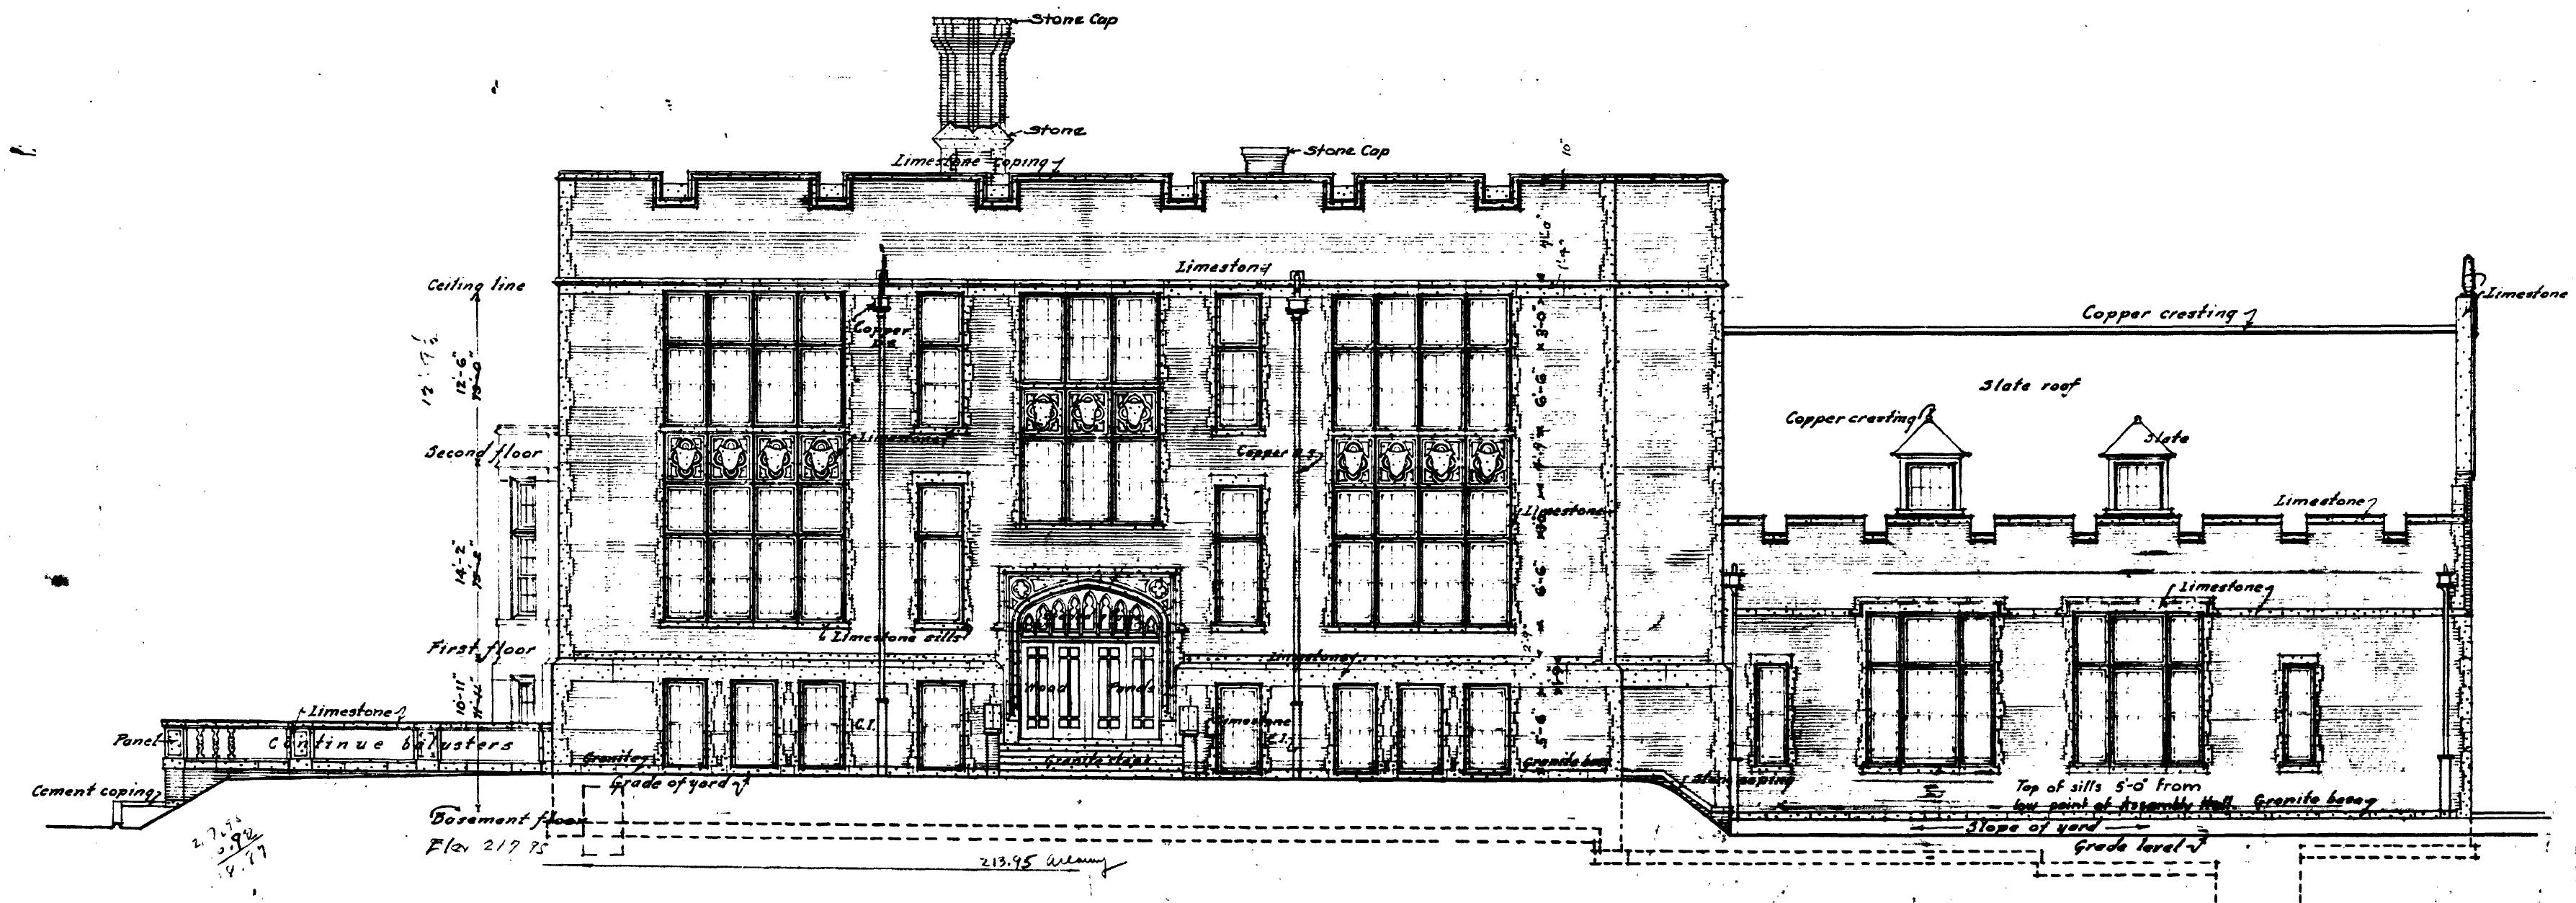 Architectural Elevation Drawings